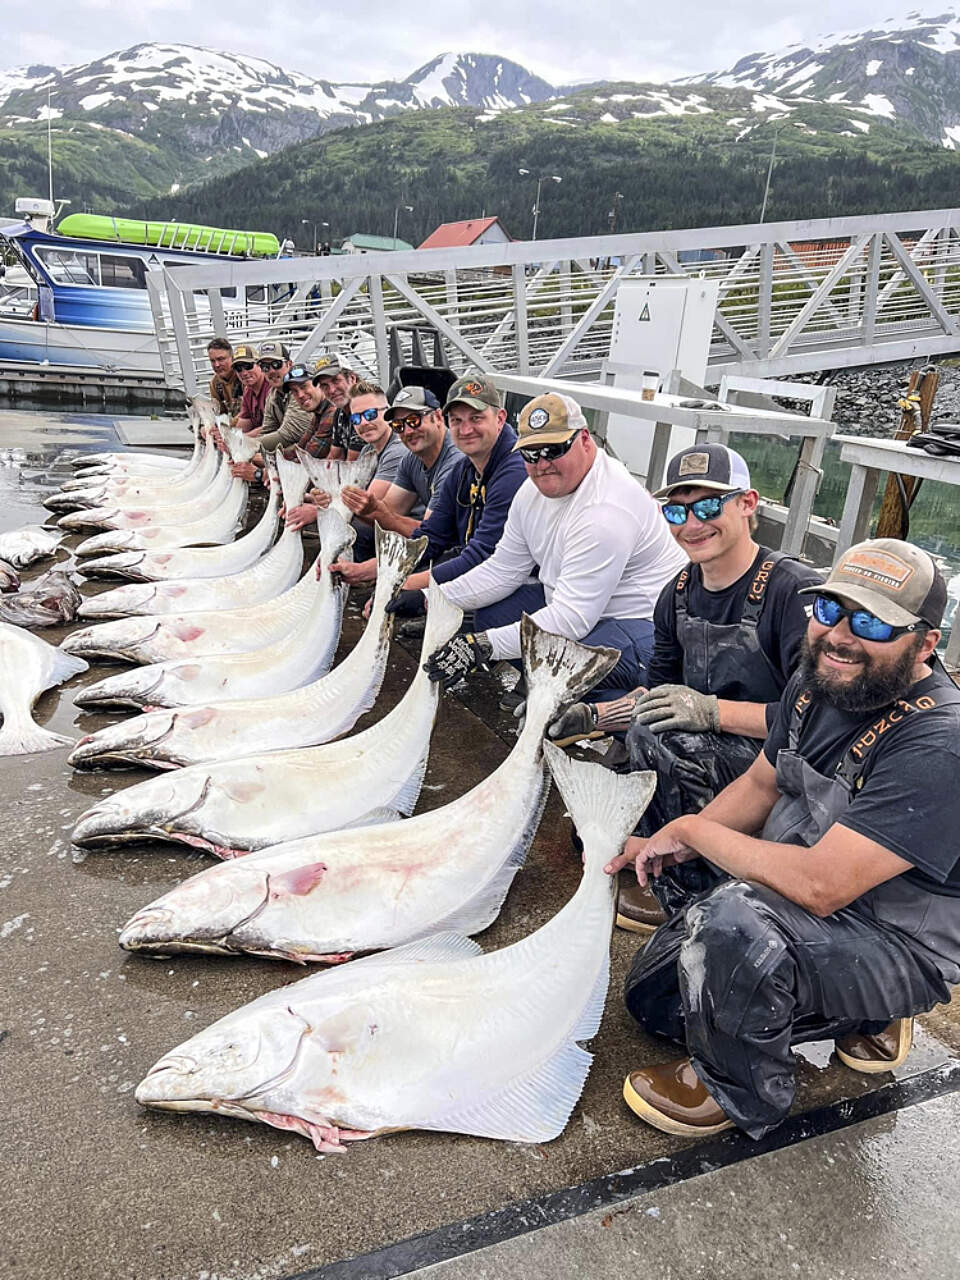 Prince William Sound provides ample opportunities to catch Pacific Halibut